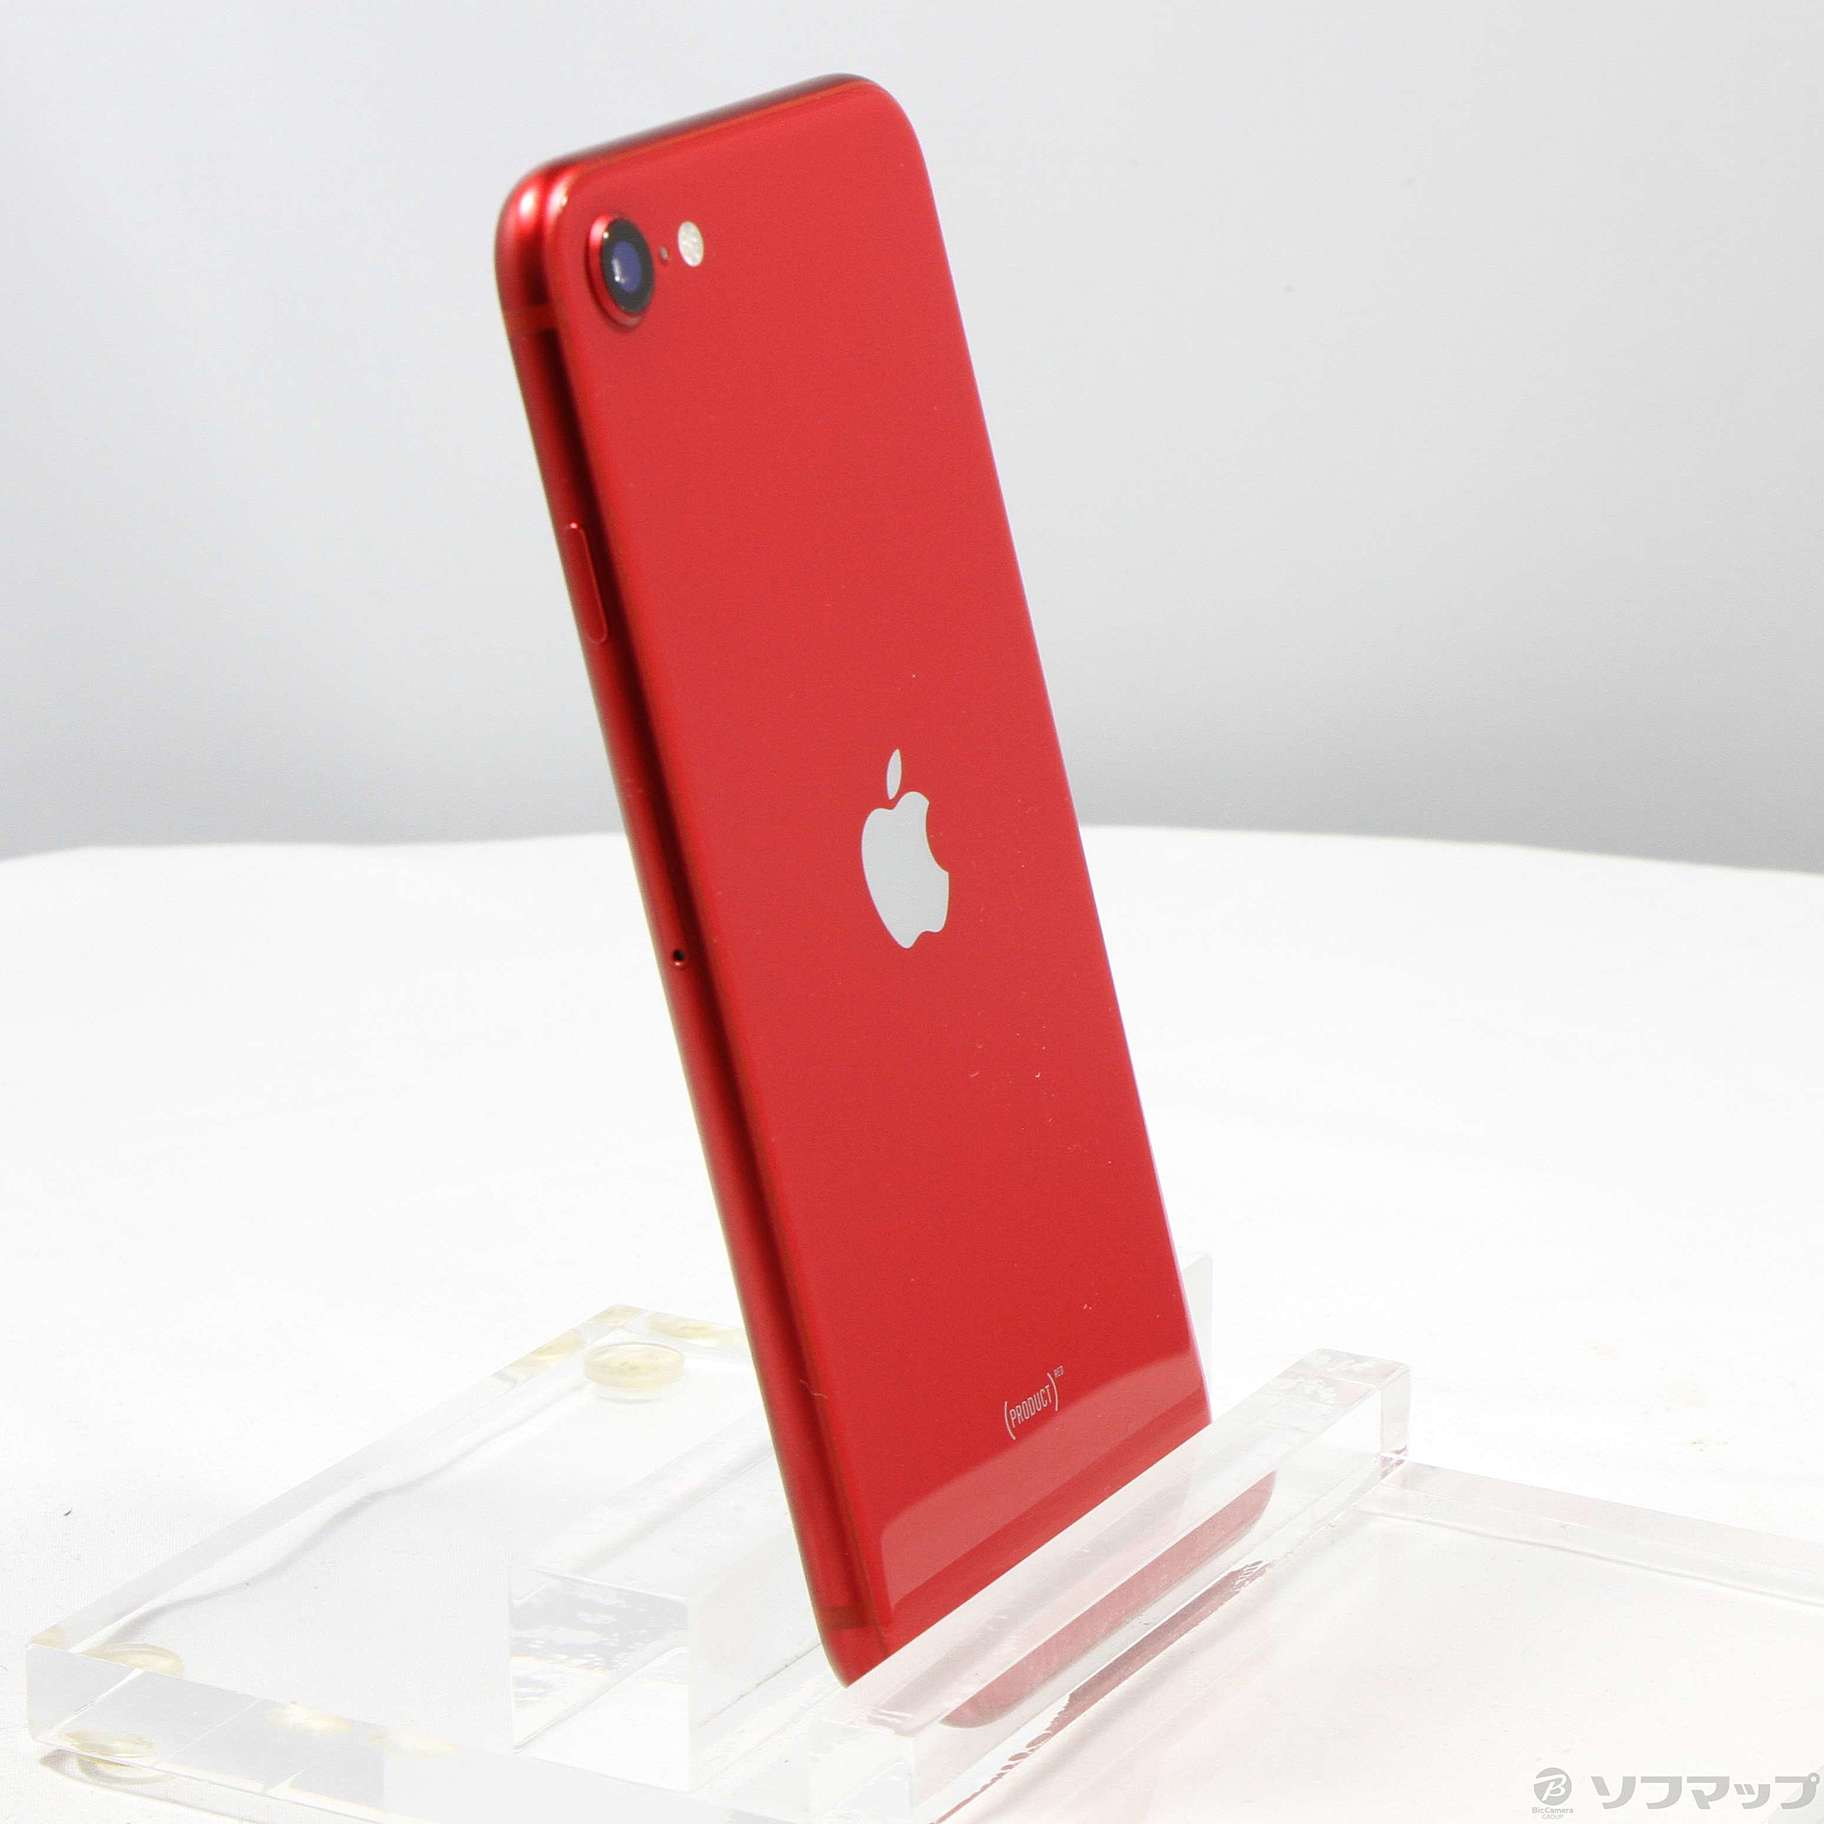 iPhone SE 第二世代　64gb product red　美品iPhonese2カラー